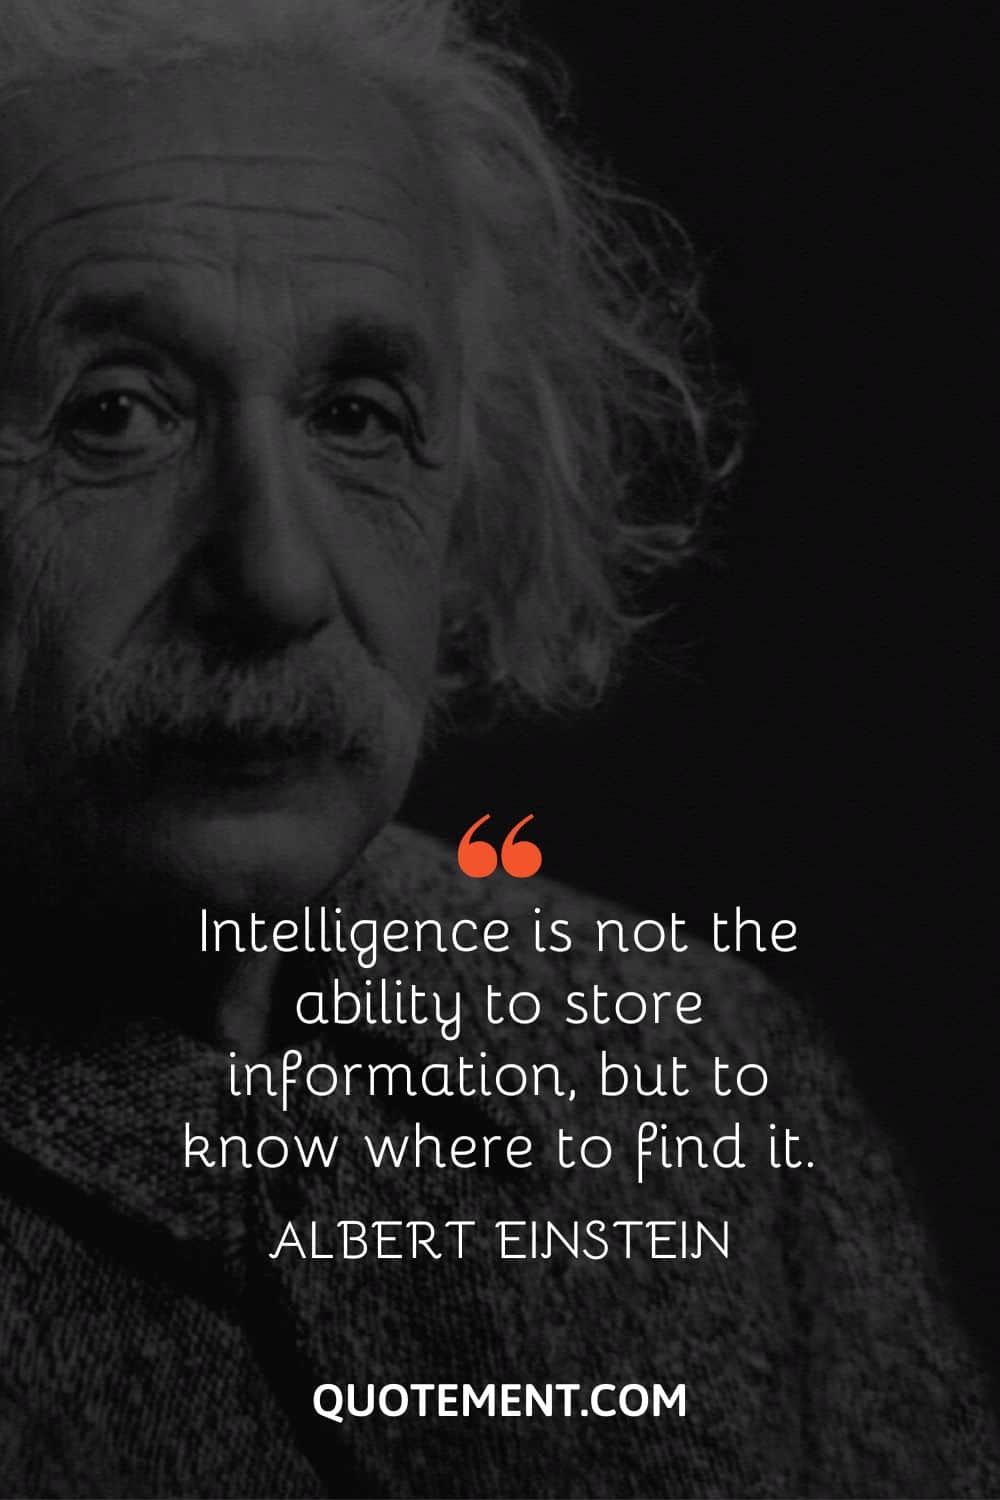 Intelligence is not the ability to store information, but to know where to find it.